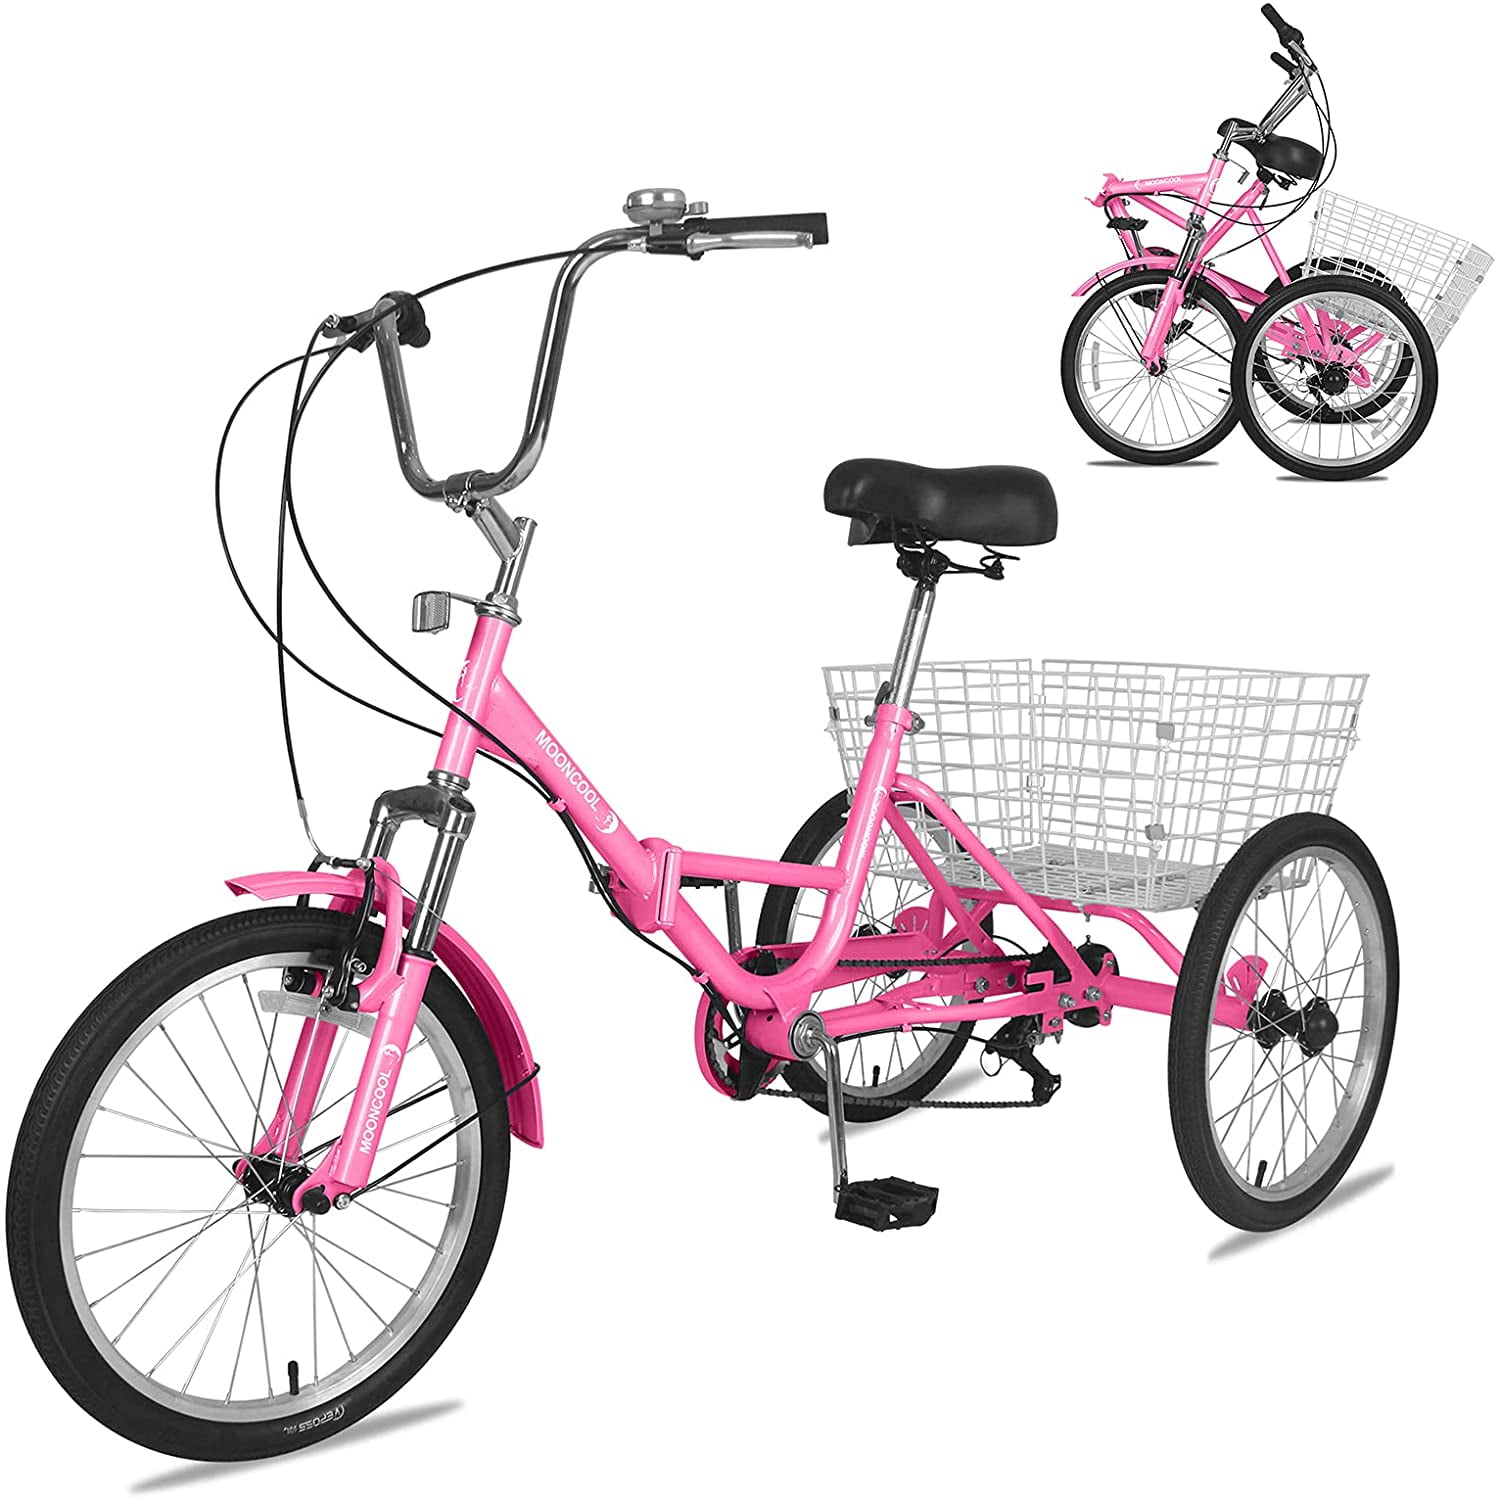 20/24/26 inch Wheels 7 Speed Adult Tricycle Men 3 Wheel Bike Cruiser Trike with Low Step-Through Seniors Exercise Shopping Adult Folding Tricycles Large Basket Foldable Tricycle for Adults Women